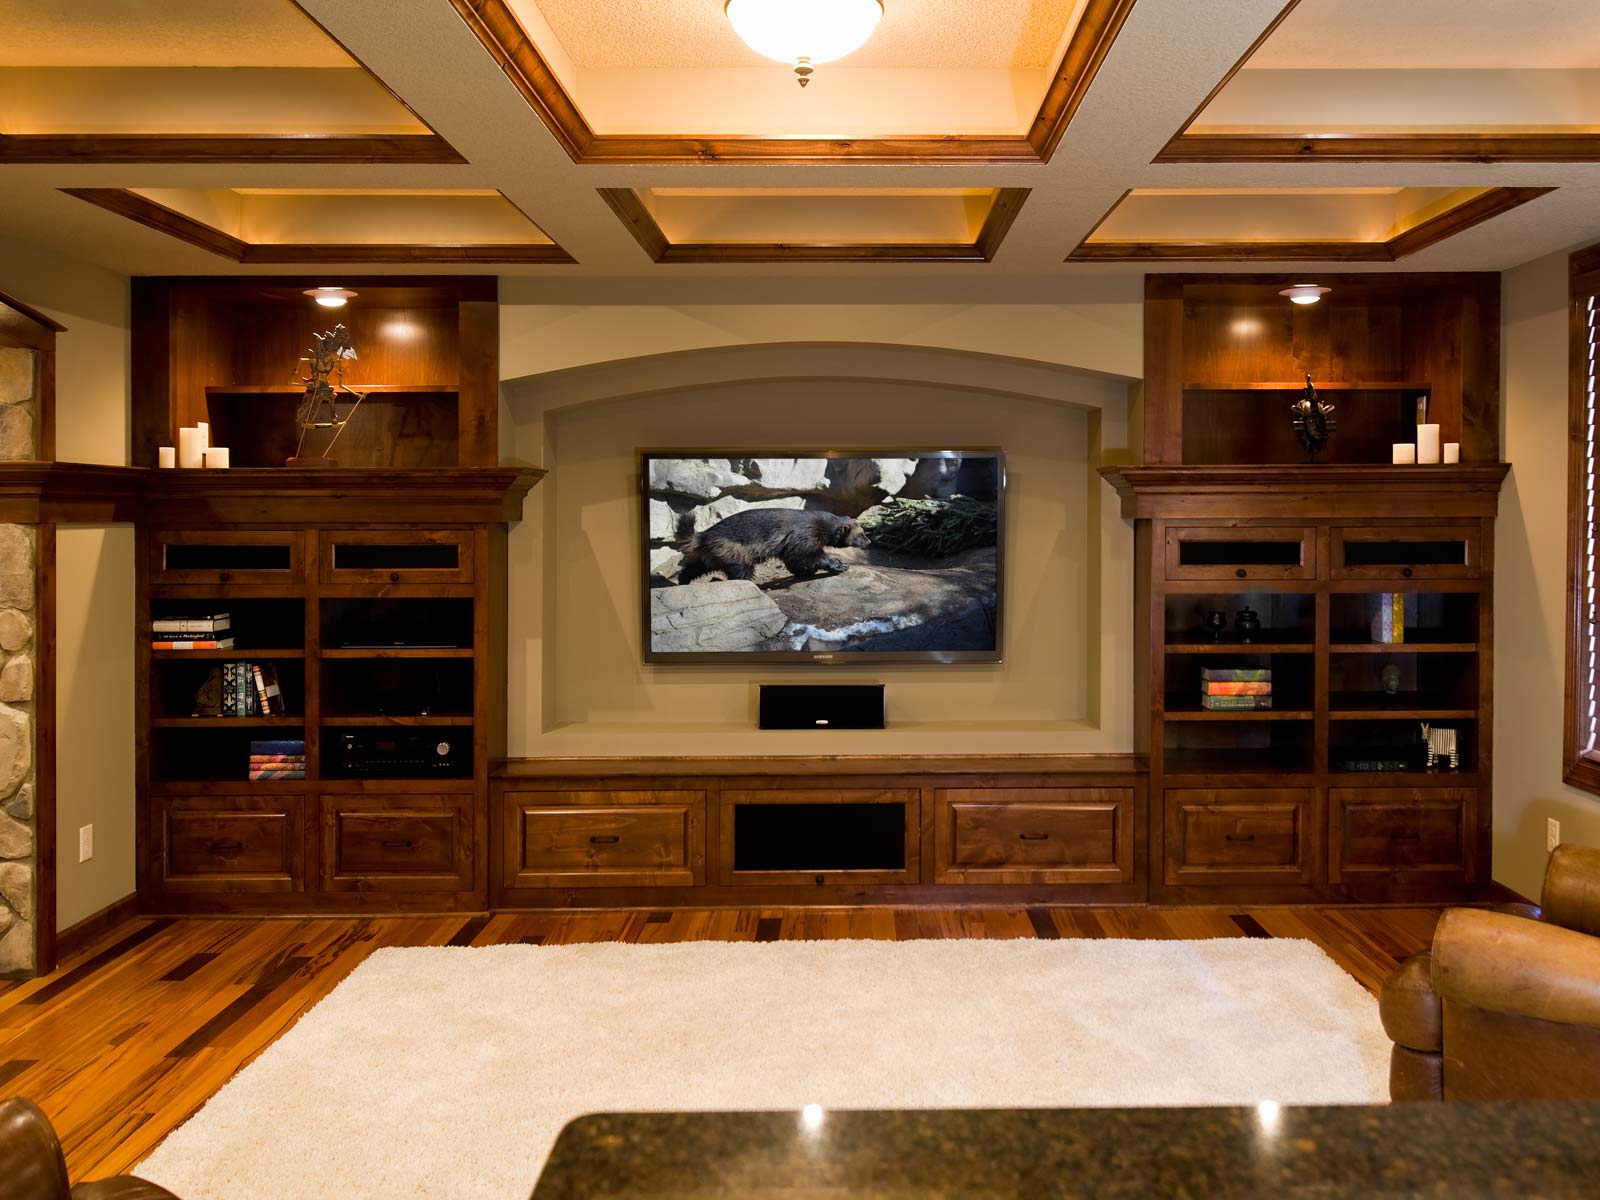 Finishing Ideas Home Amazing Basement Finishing Ideas With Magnificent Traditional Home Cinema Room Using Wooden Flooring And White Carpet Combined With Wooden Cabinet Ideas Basement Basement Finishing Ideas Leading To Stunning Results